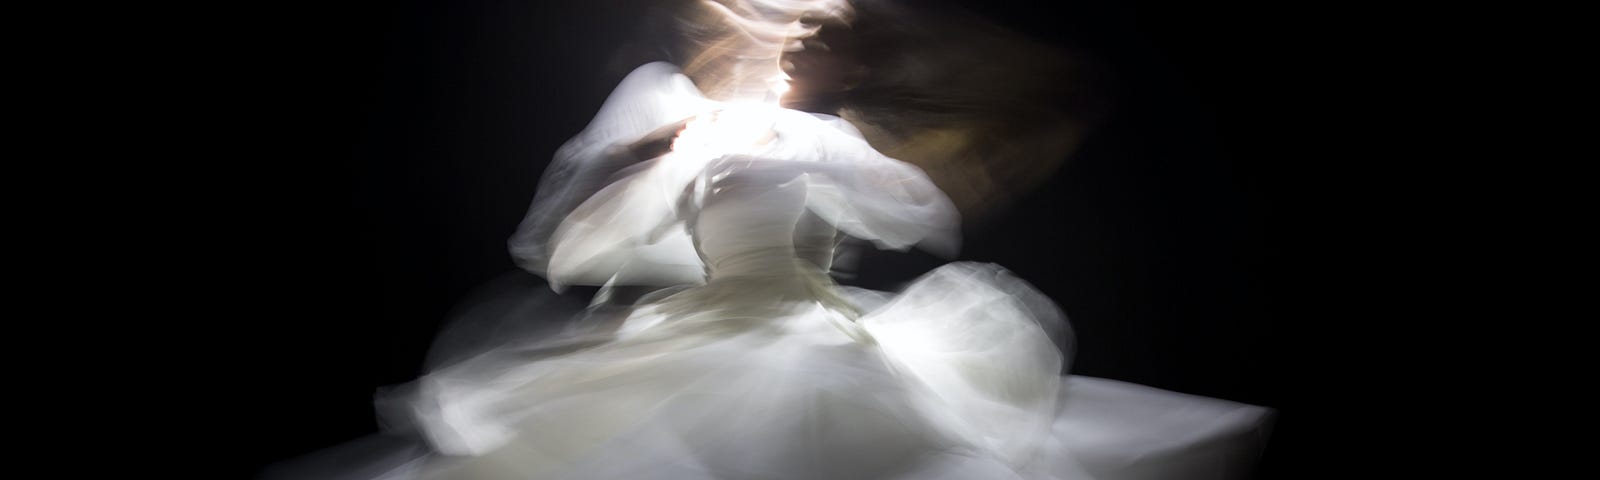 Photo of a woman in a white dress dancing in front of a black background. She’s twirling, her dress and scarves flaring out in all directions from her body. Her blonde hair covers her face as she continues to spin. A vertical white light shines on her head, like a connection with Spirit or God.